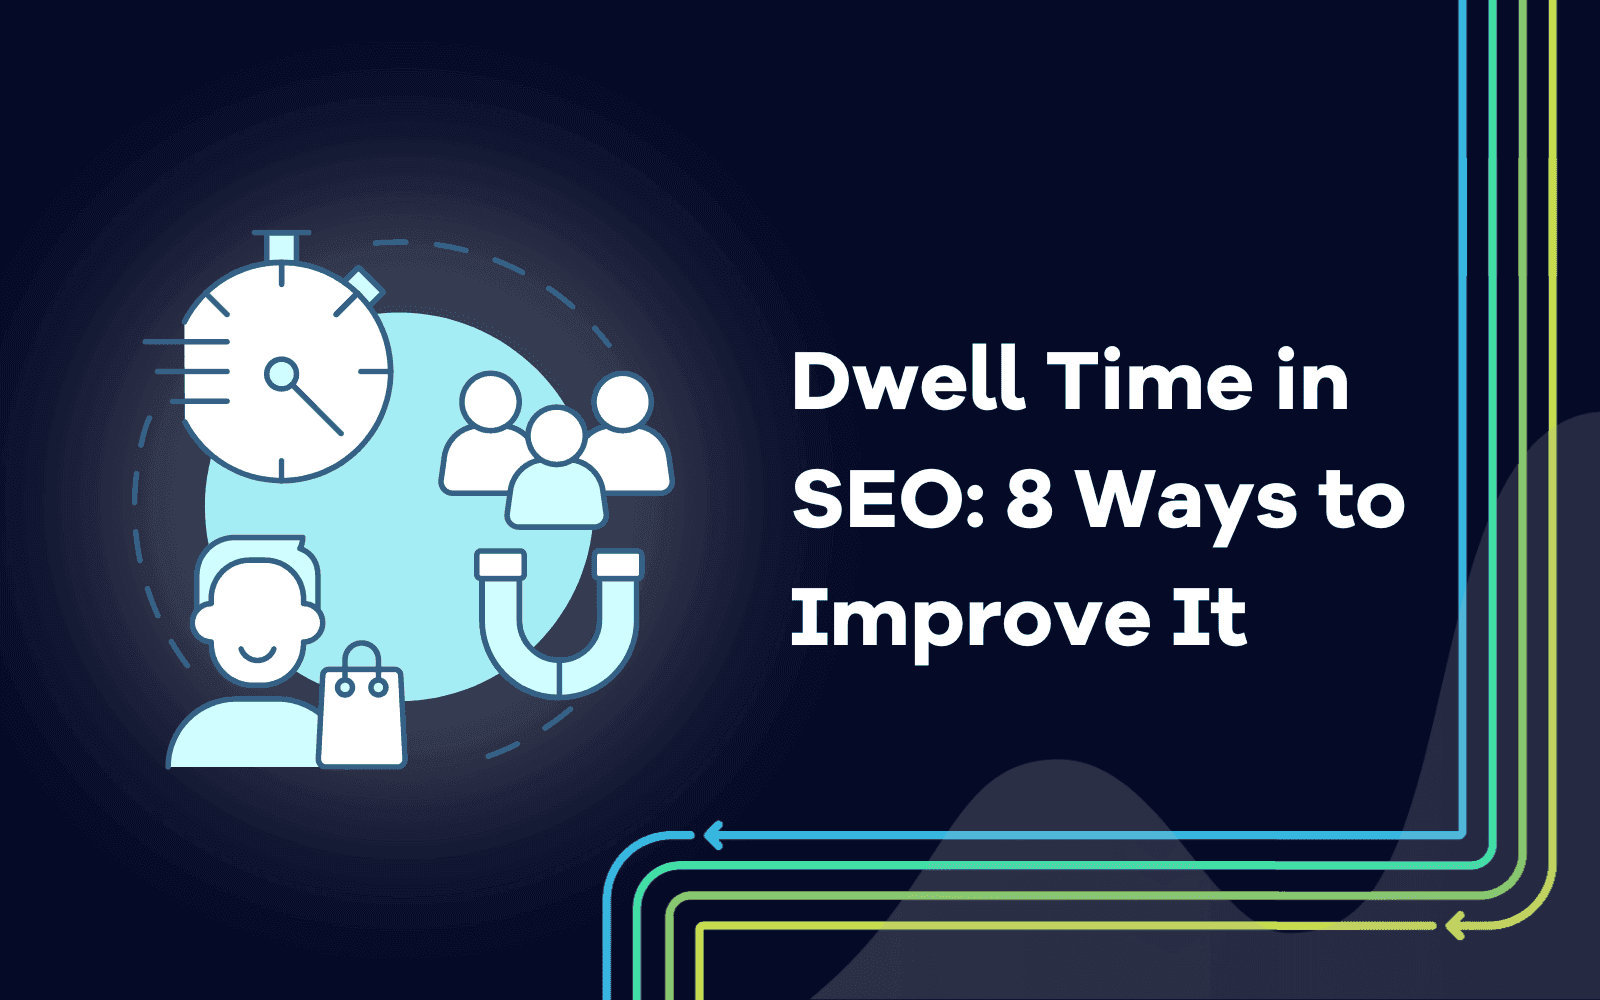 Dwell Time in SEO 8 Ways to Improve It